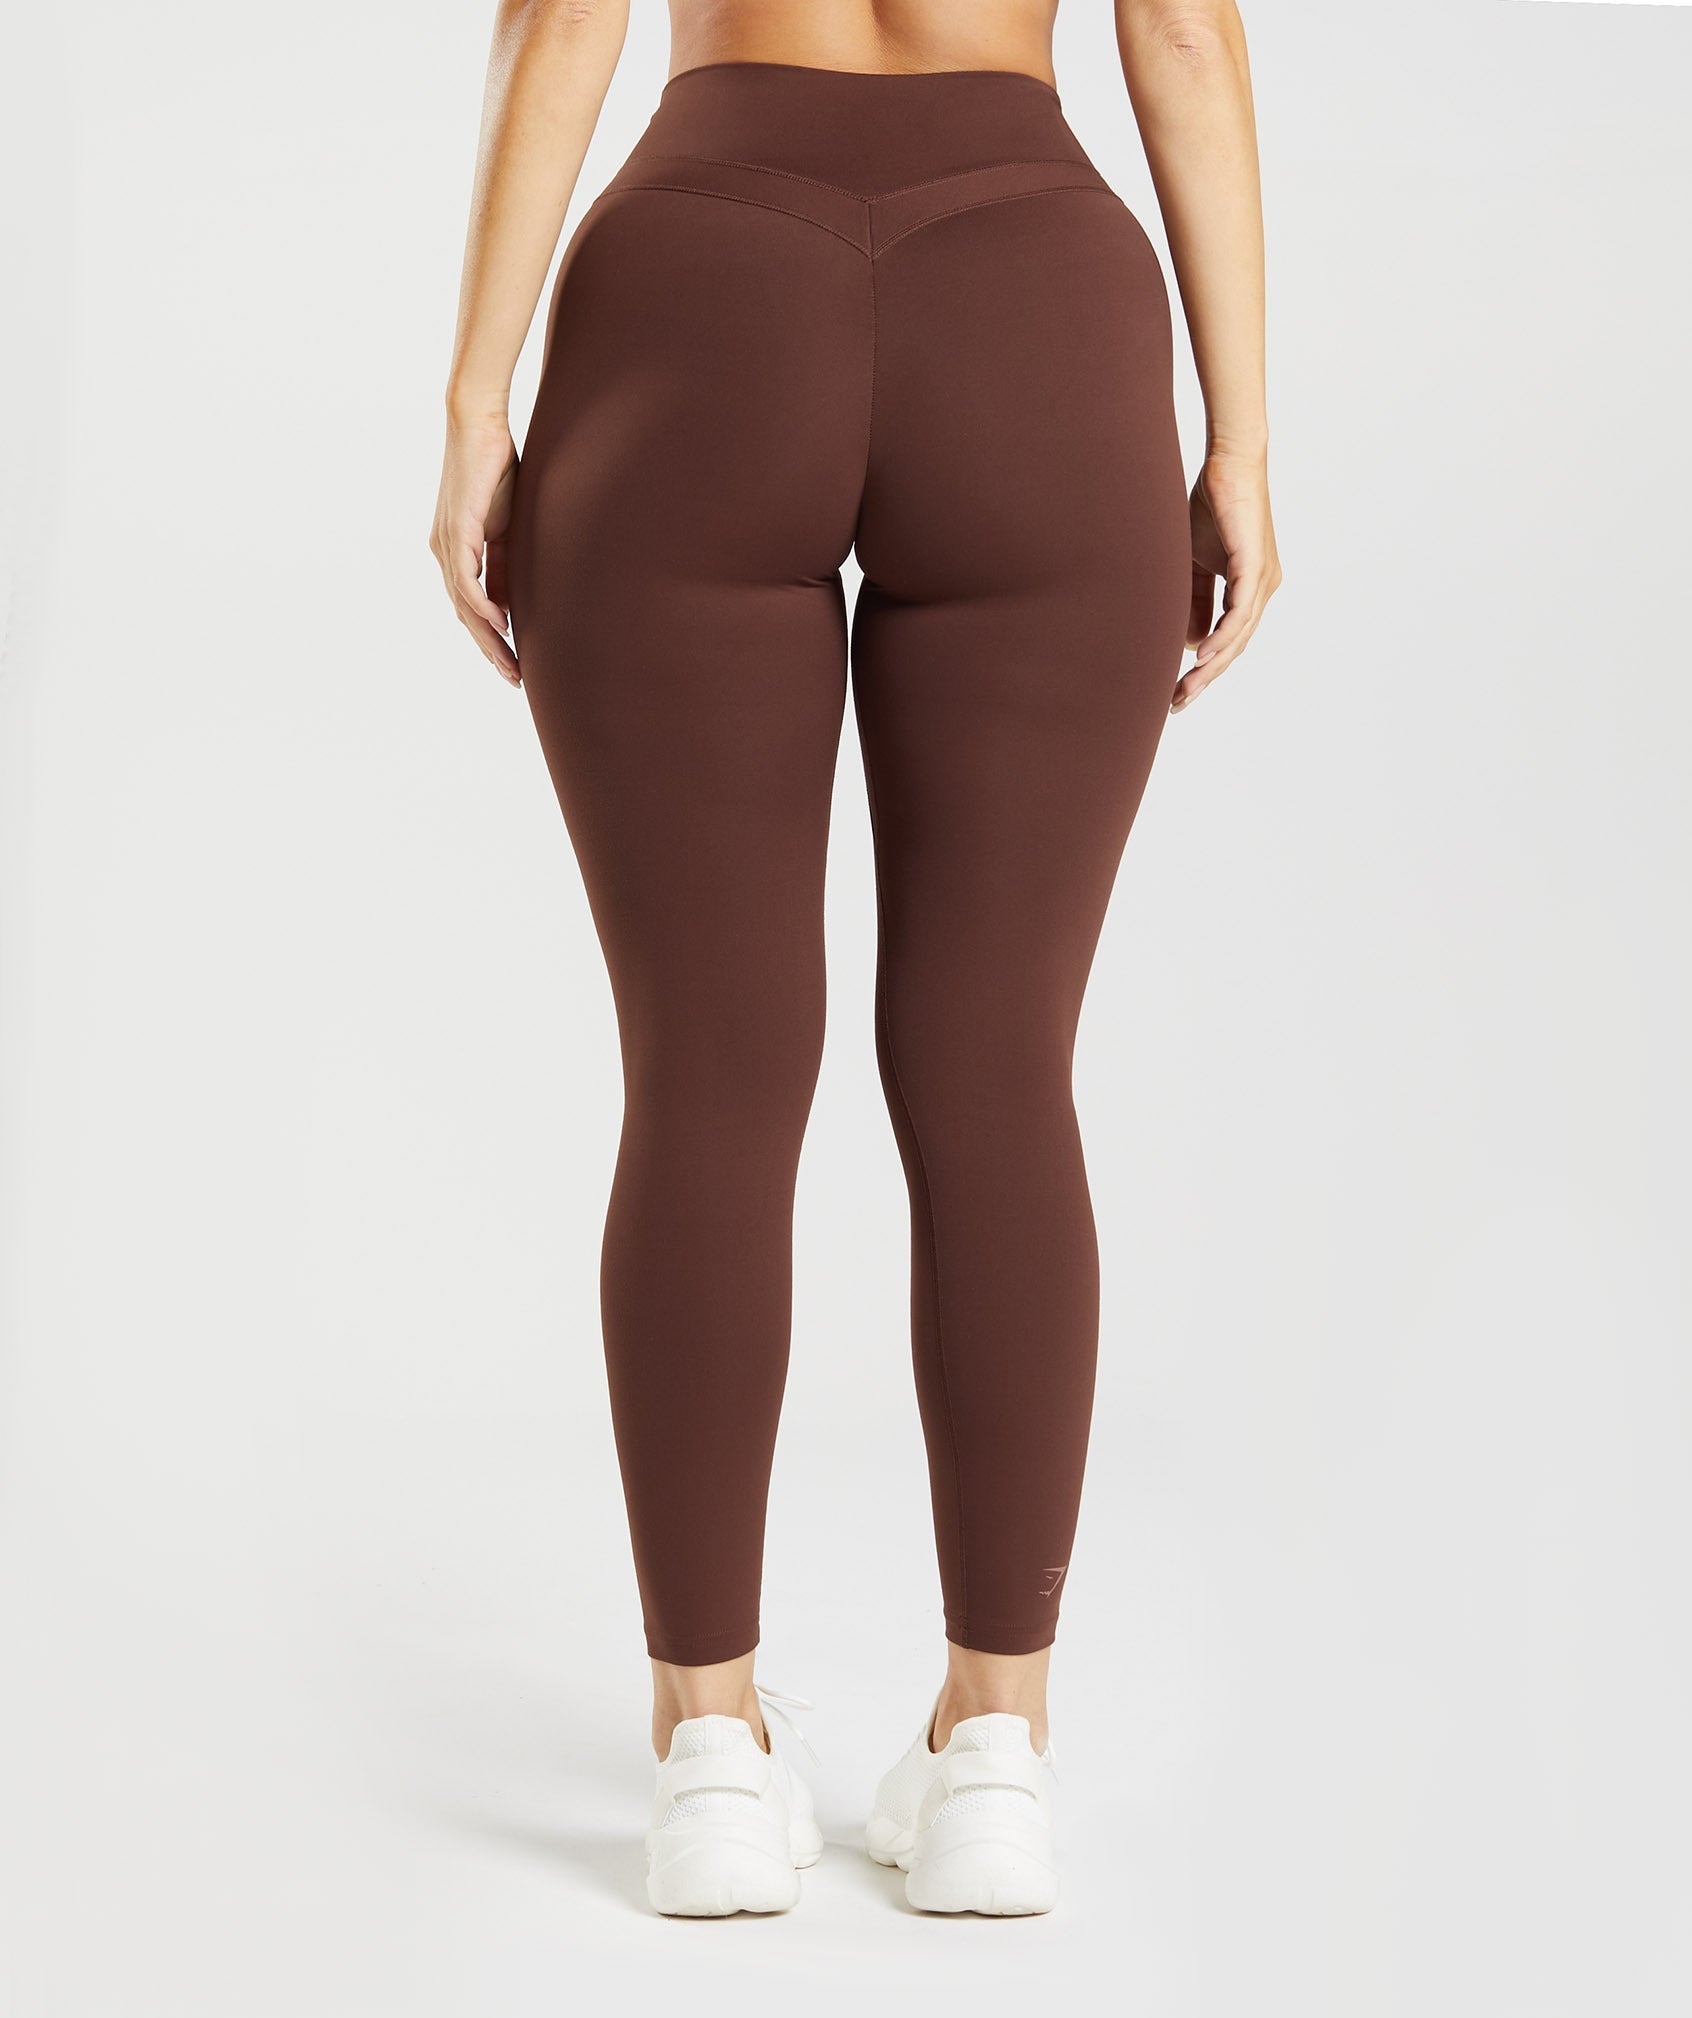 NEW High Waisted Glitter and Sparkle Cognac Brown Leggings by